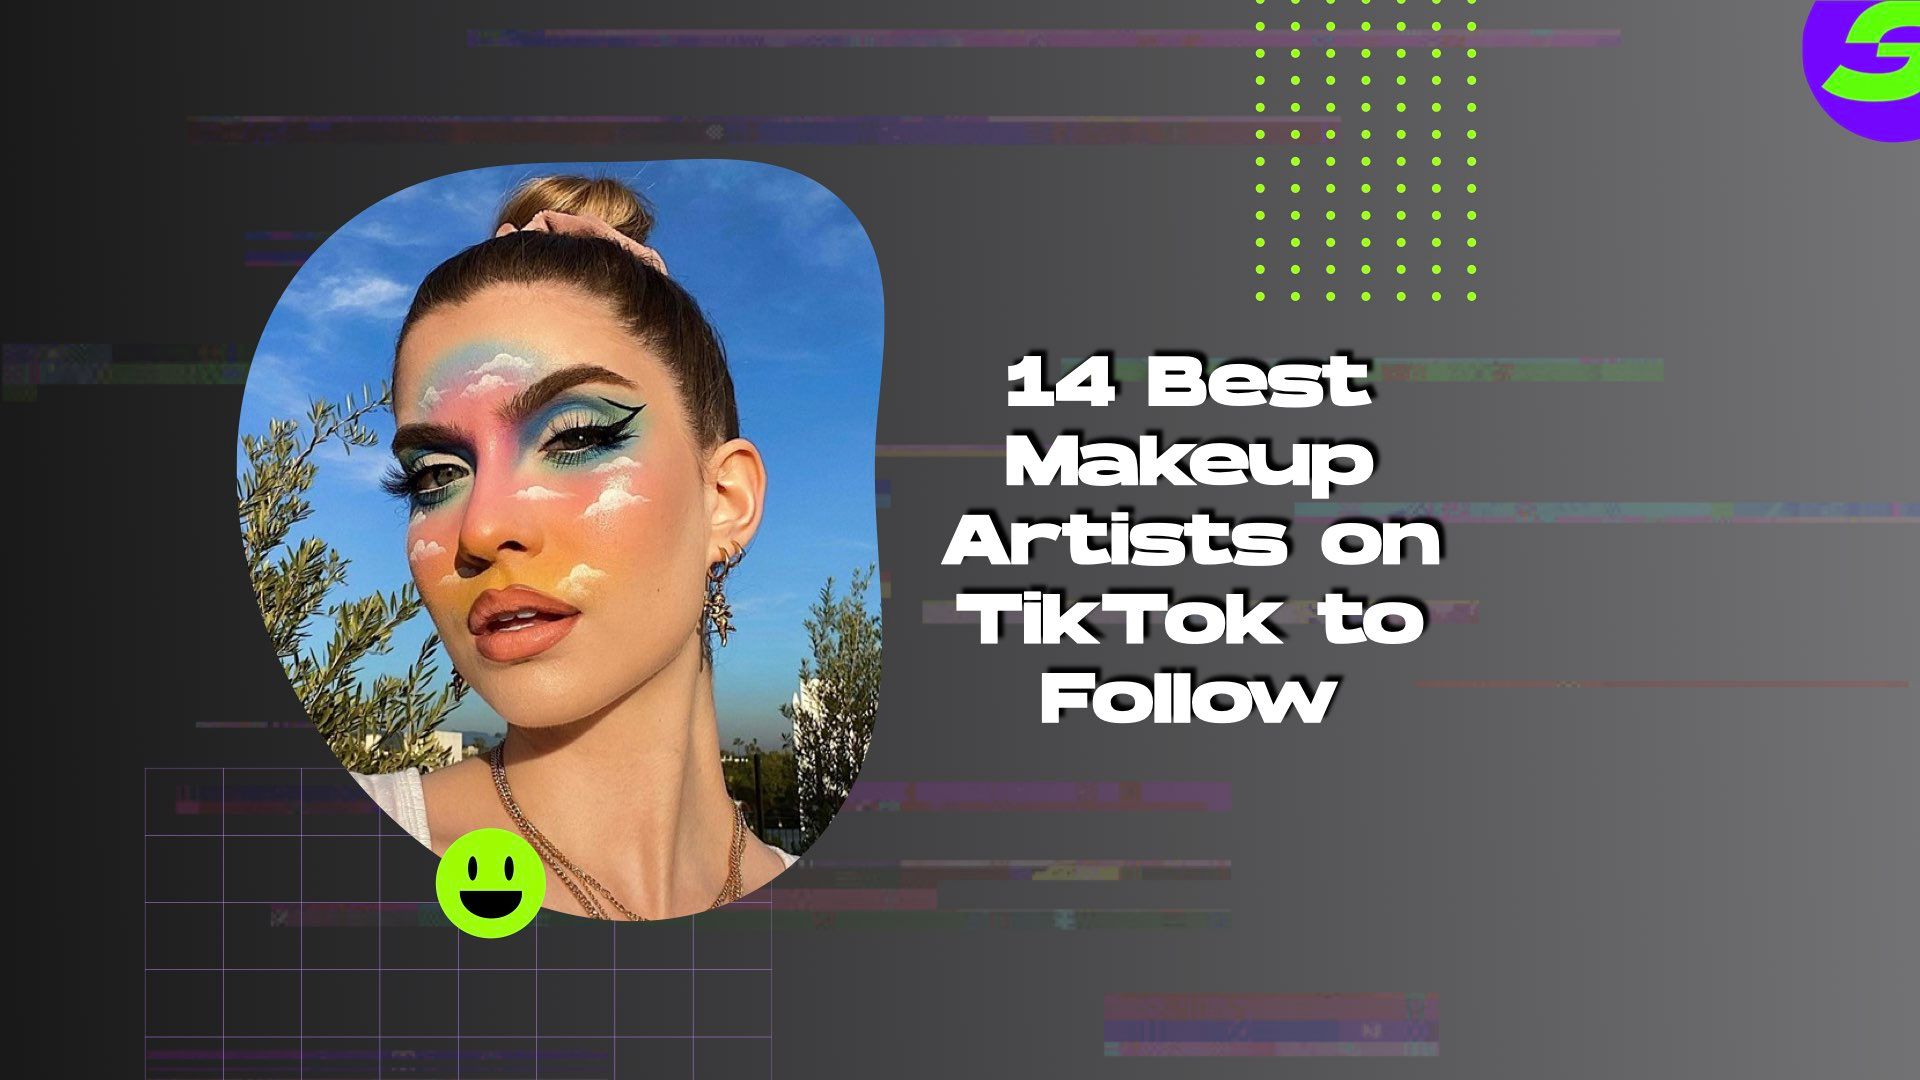 ShotCut free video editor android 14 Best Makeup Artists on TikTok to Follow